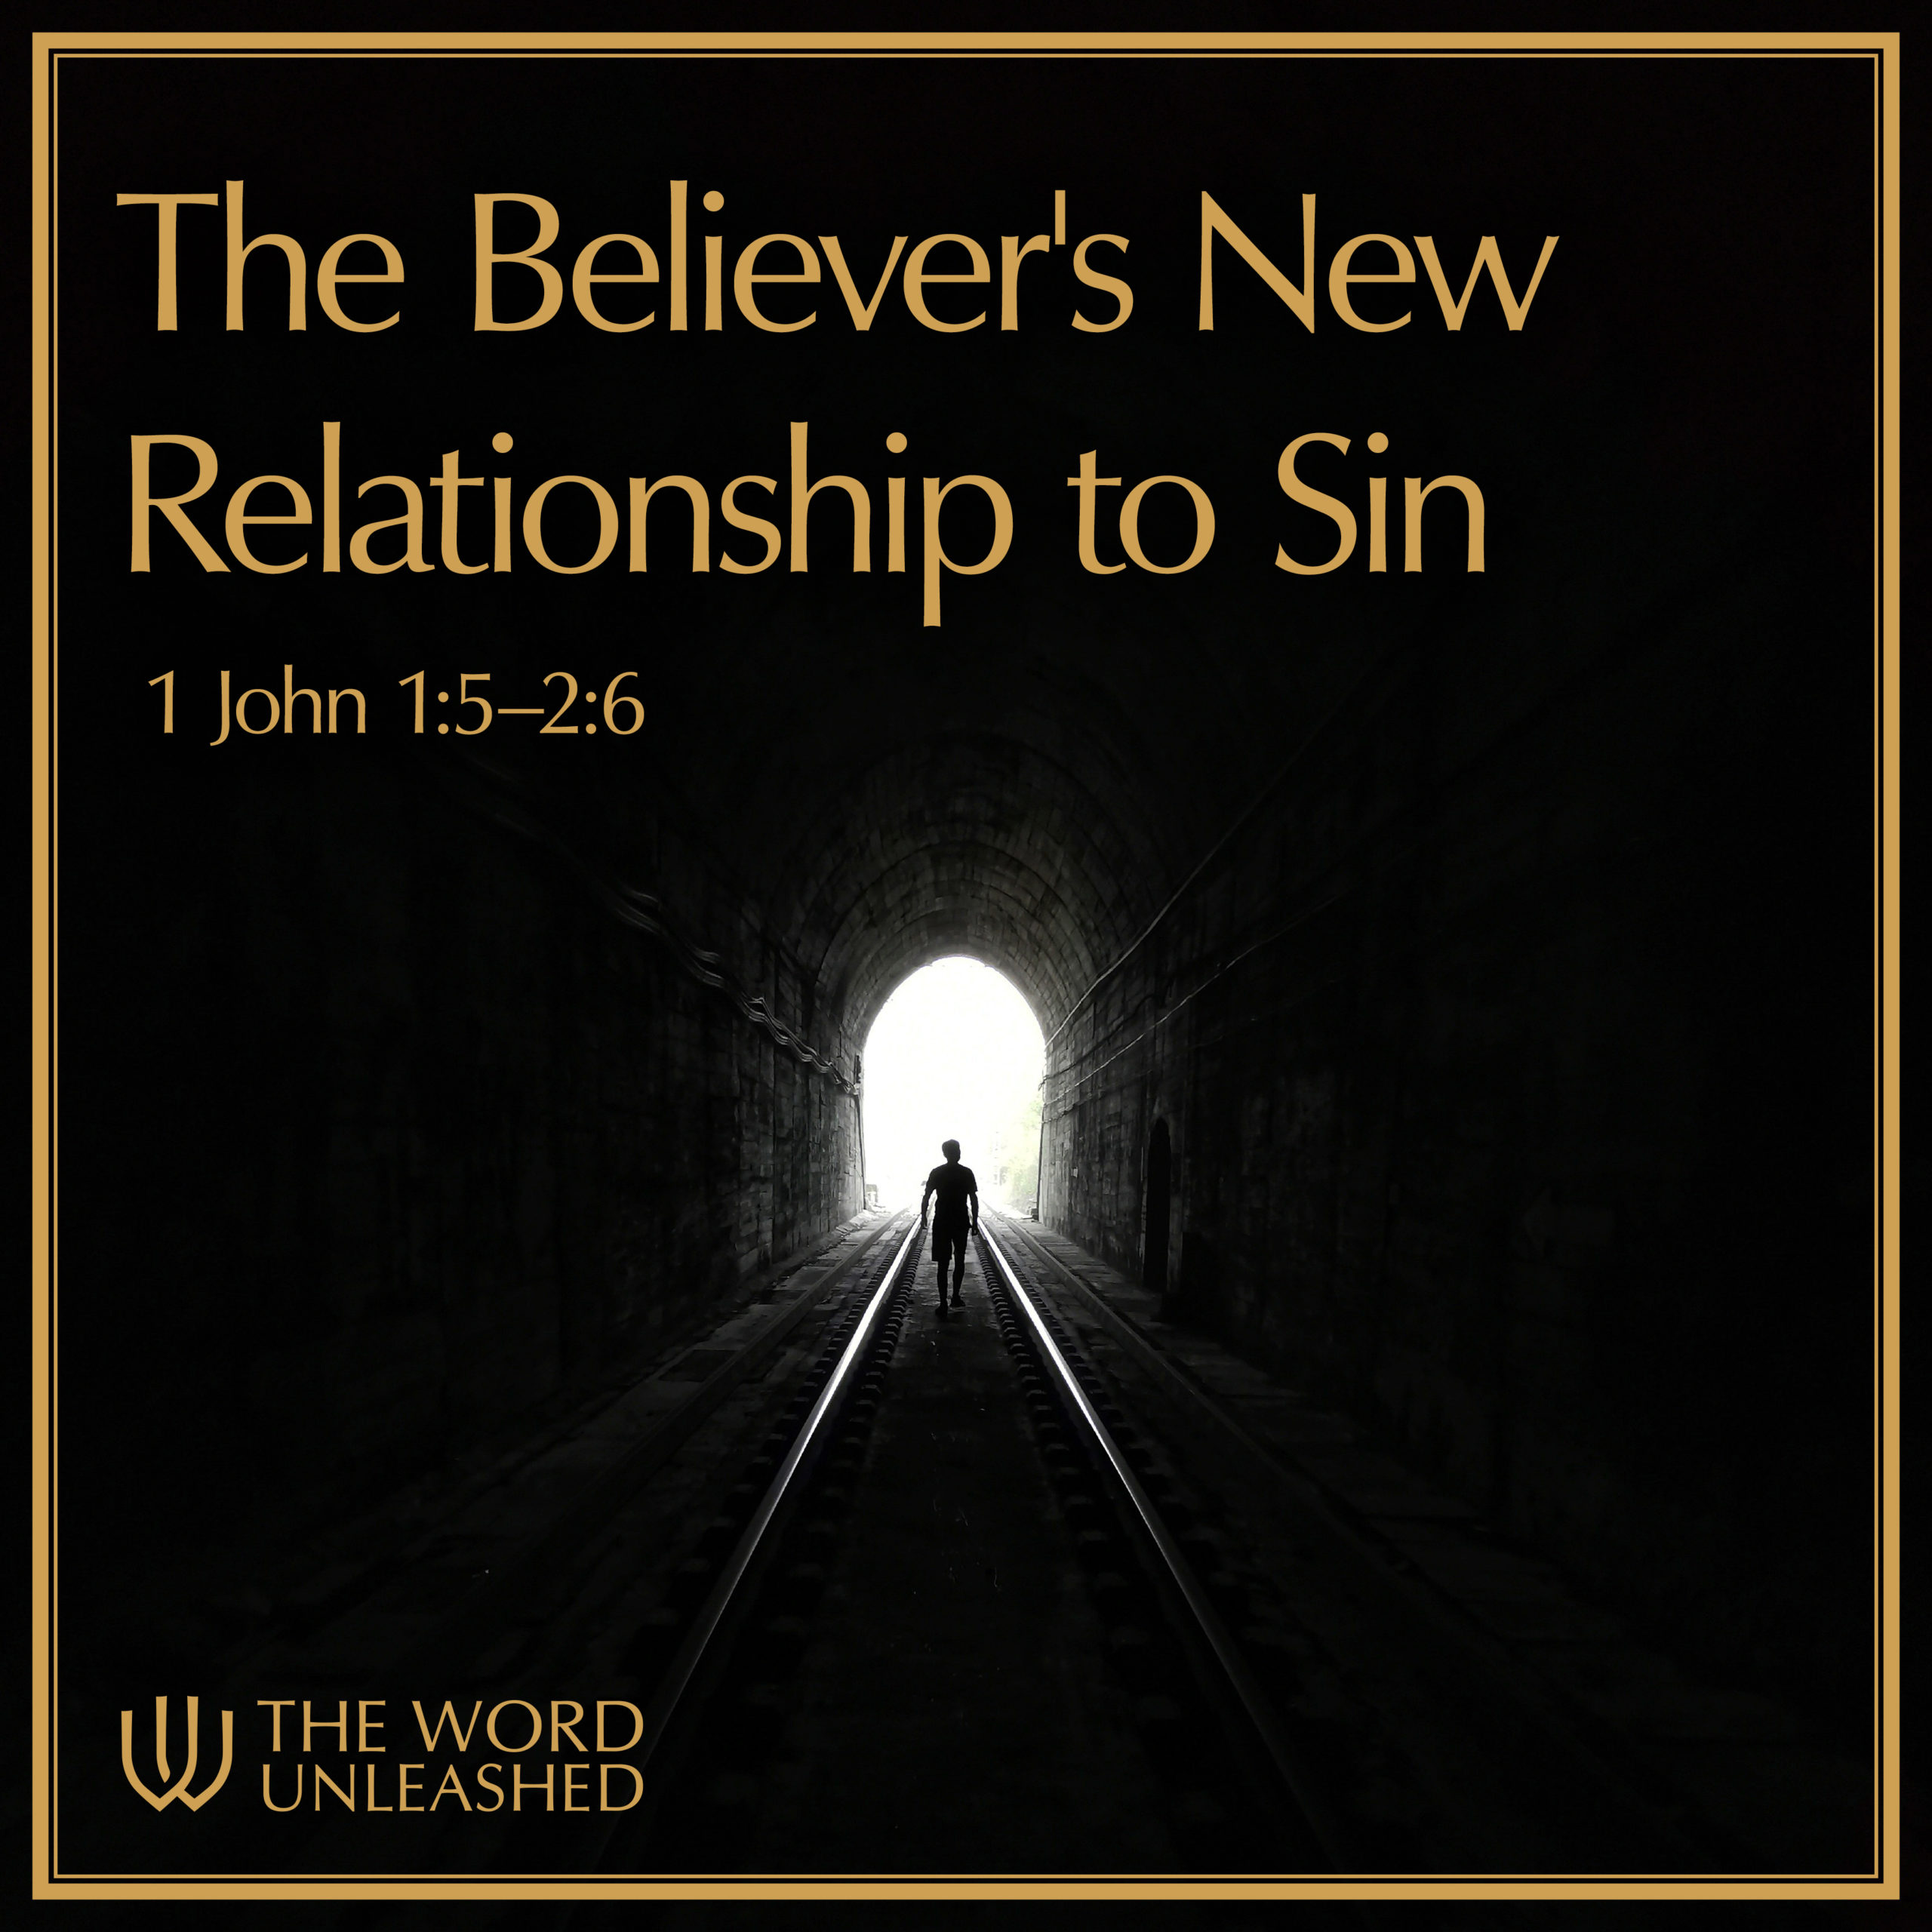 The Believer's New Relationship to Sin